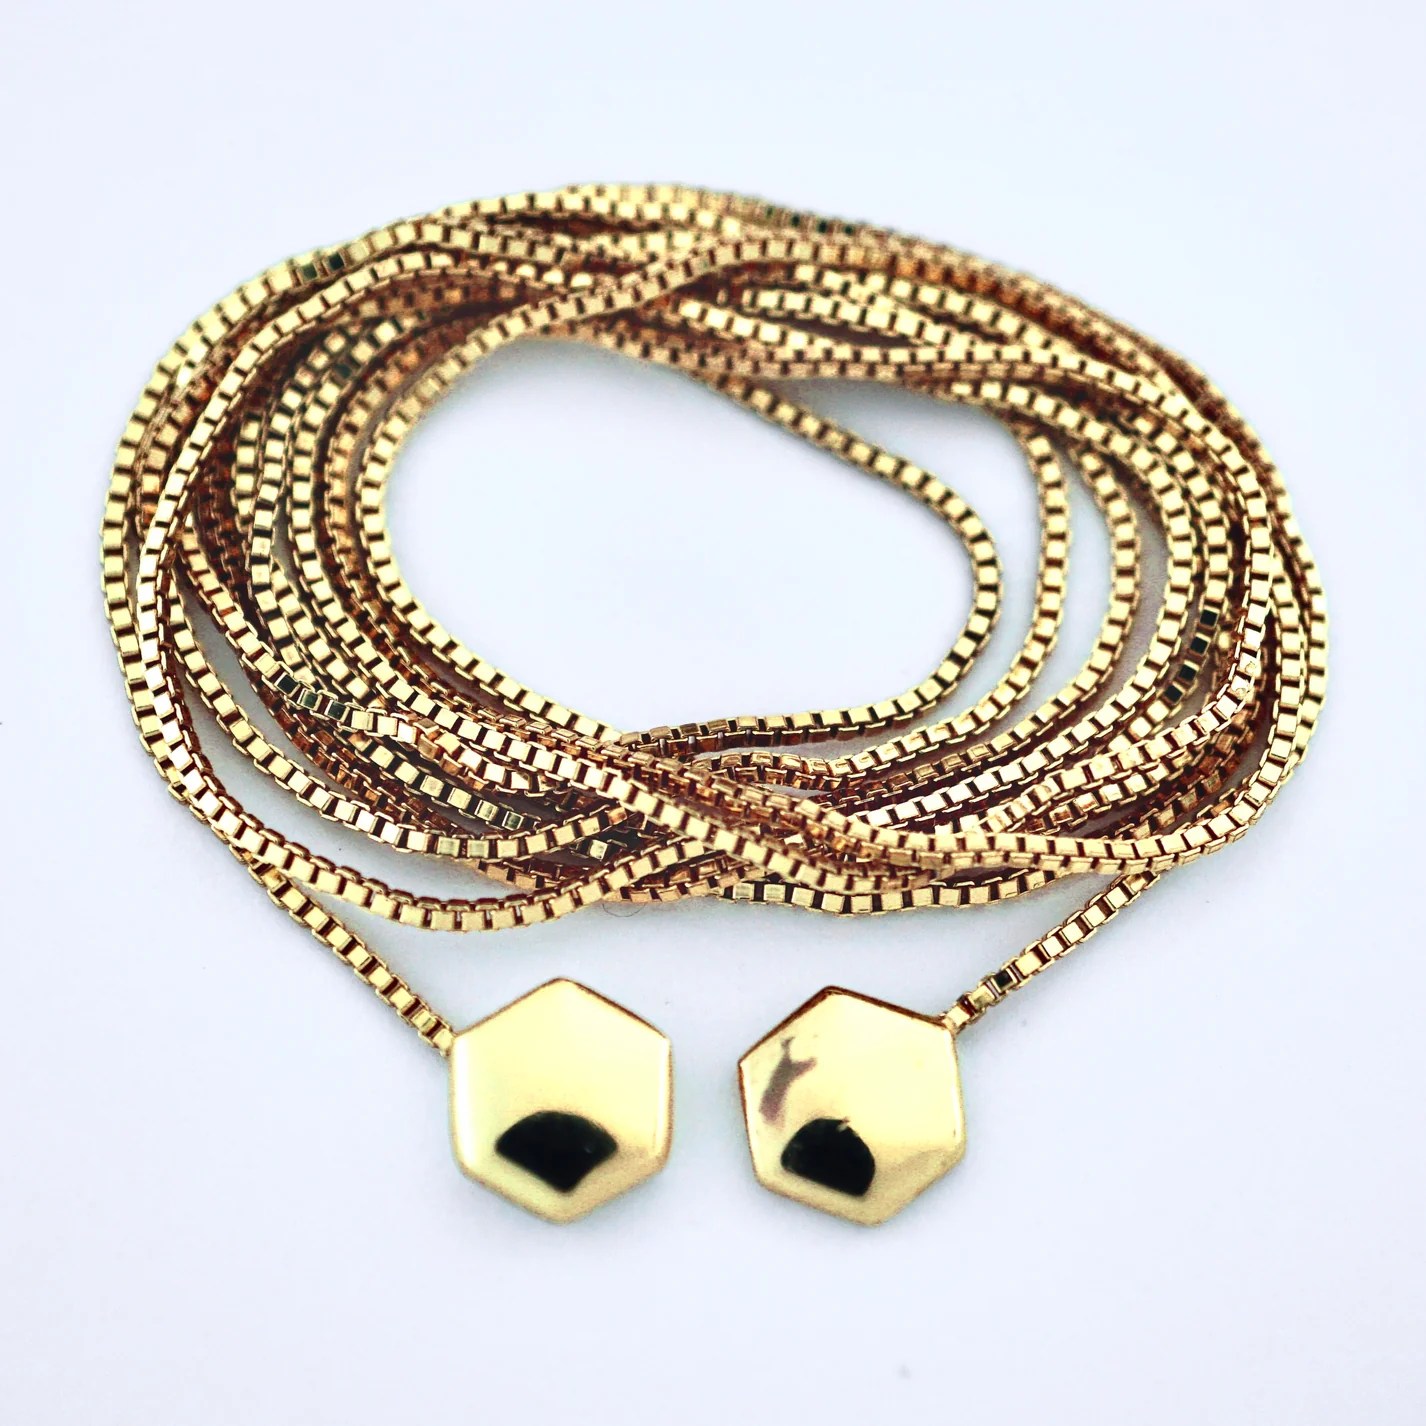 Aivia magnetic chain, from our valentine's day gift guide